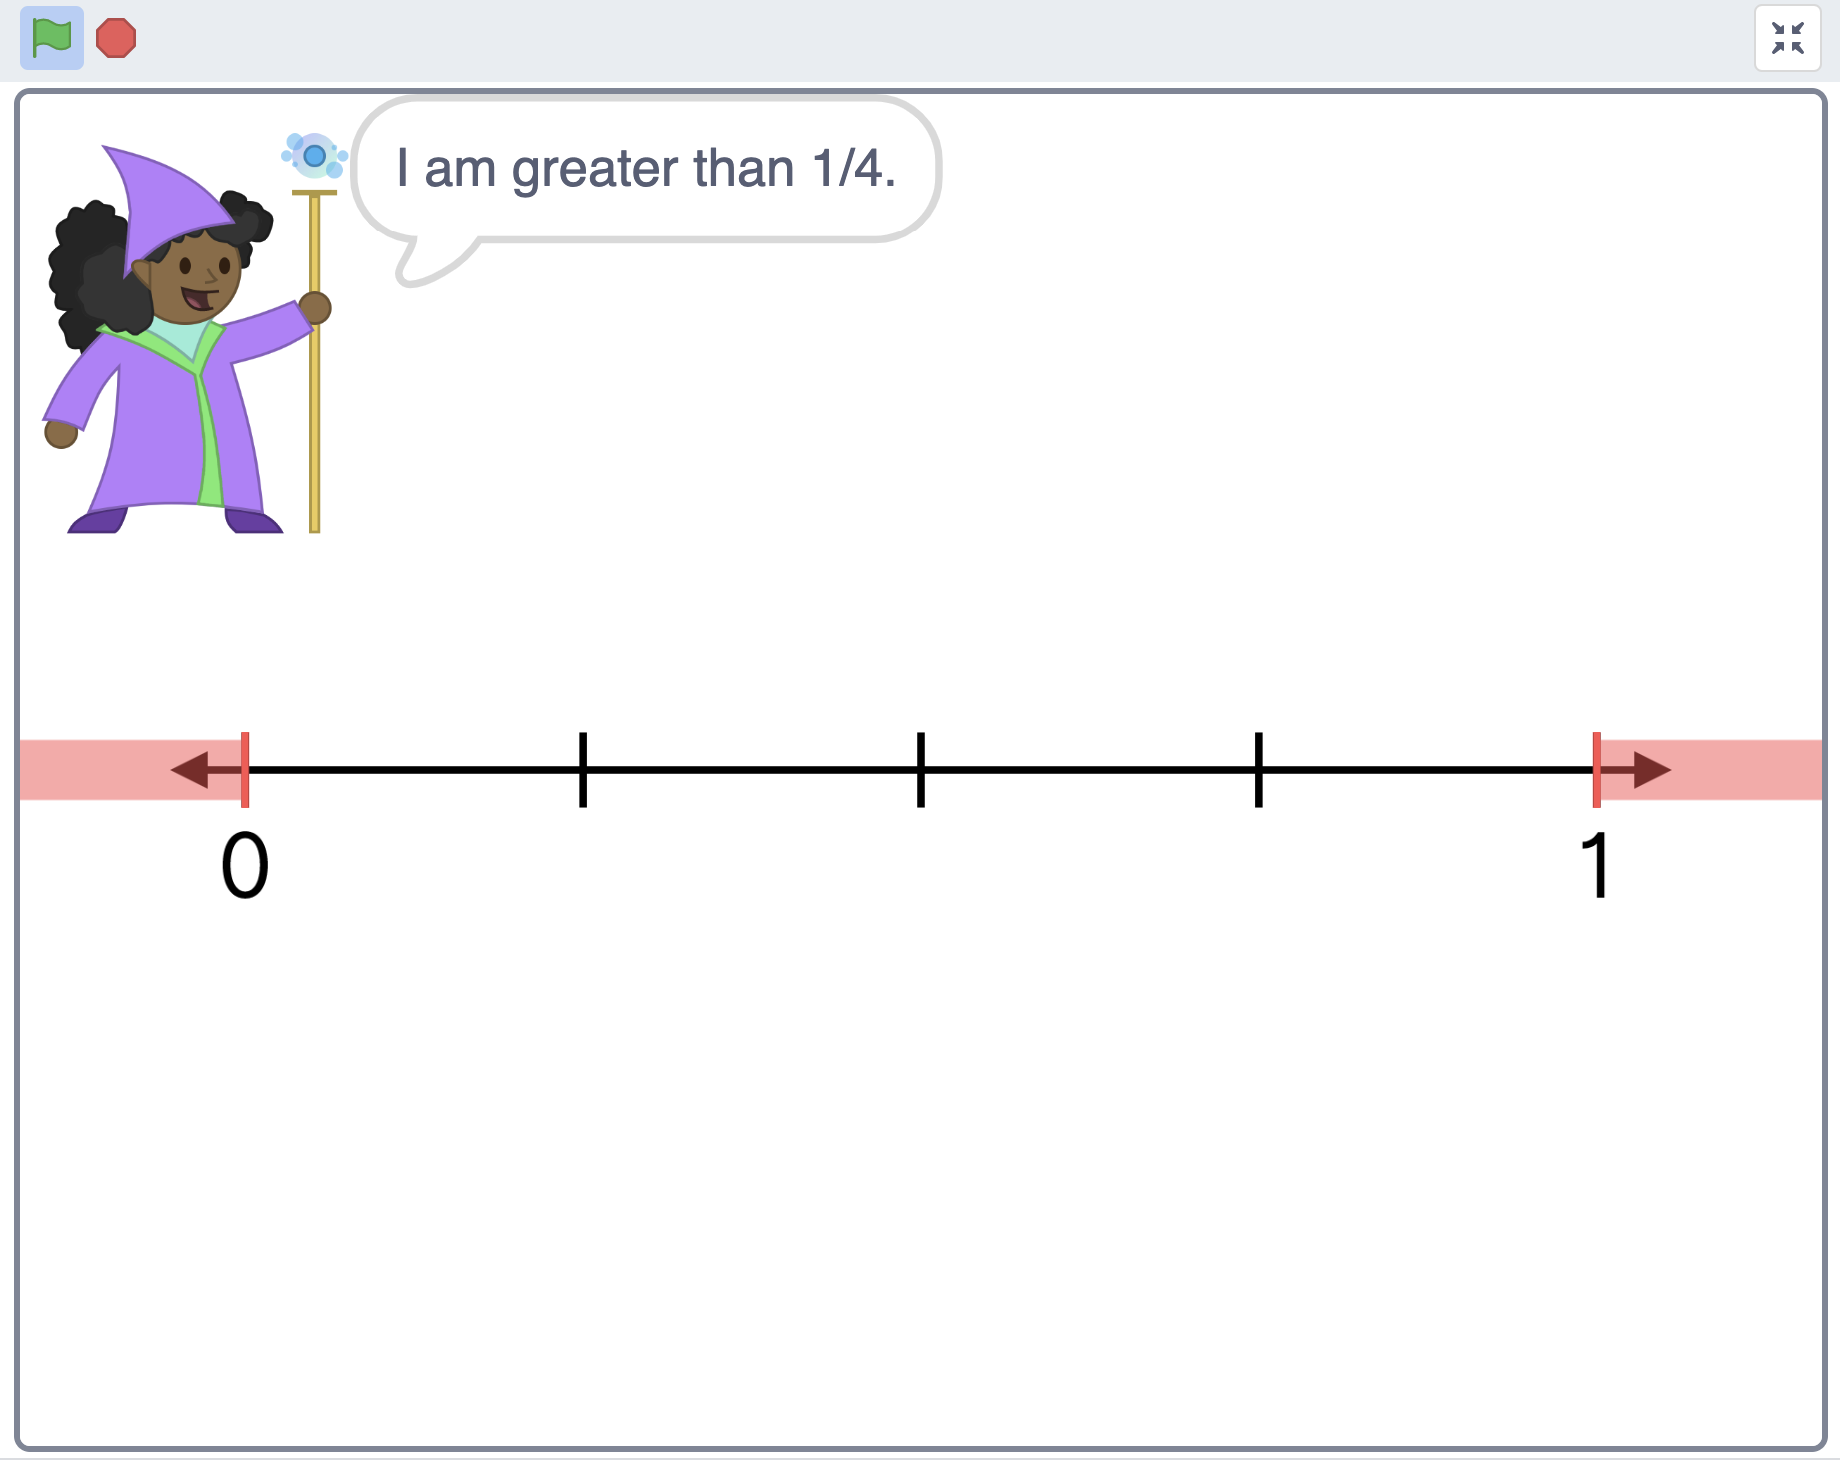 Scratch project stage depicting a girl dressed as a wizard, saying "I am greater than one-fourth." She stands over a number line divided in four parts.